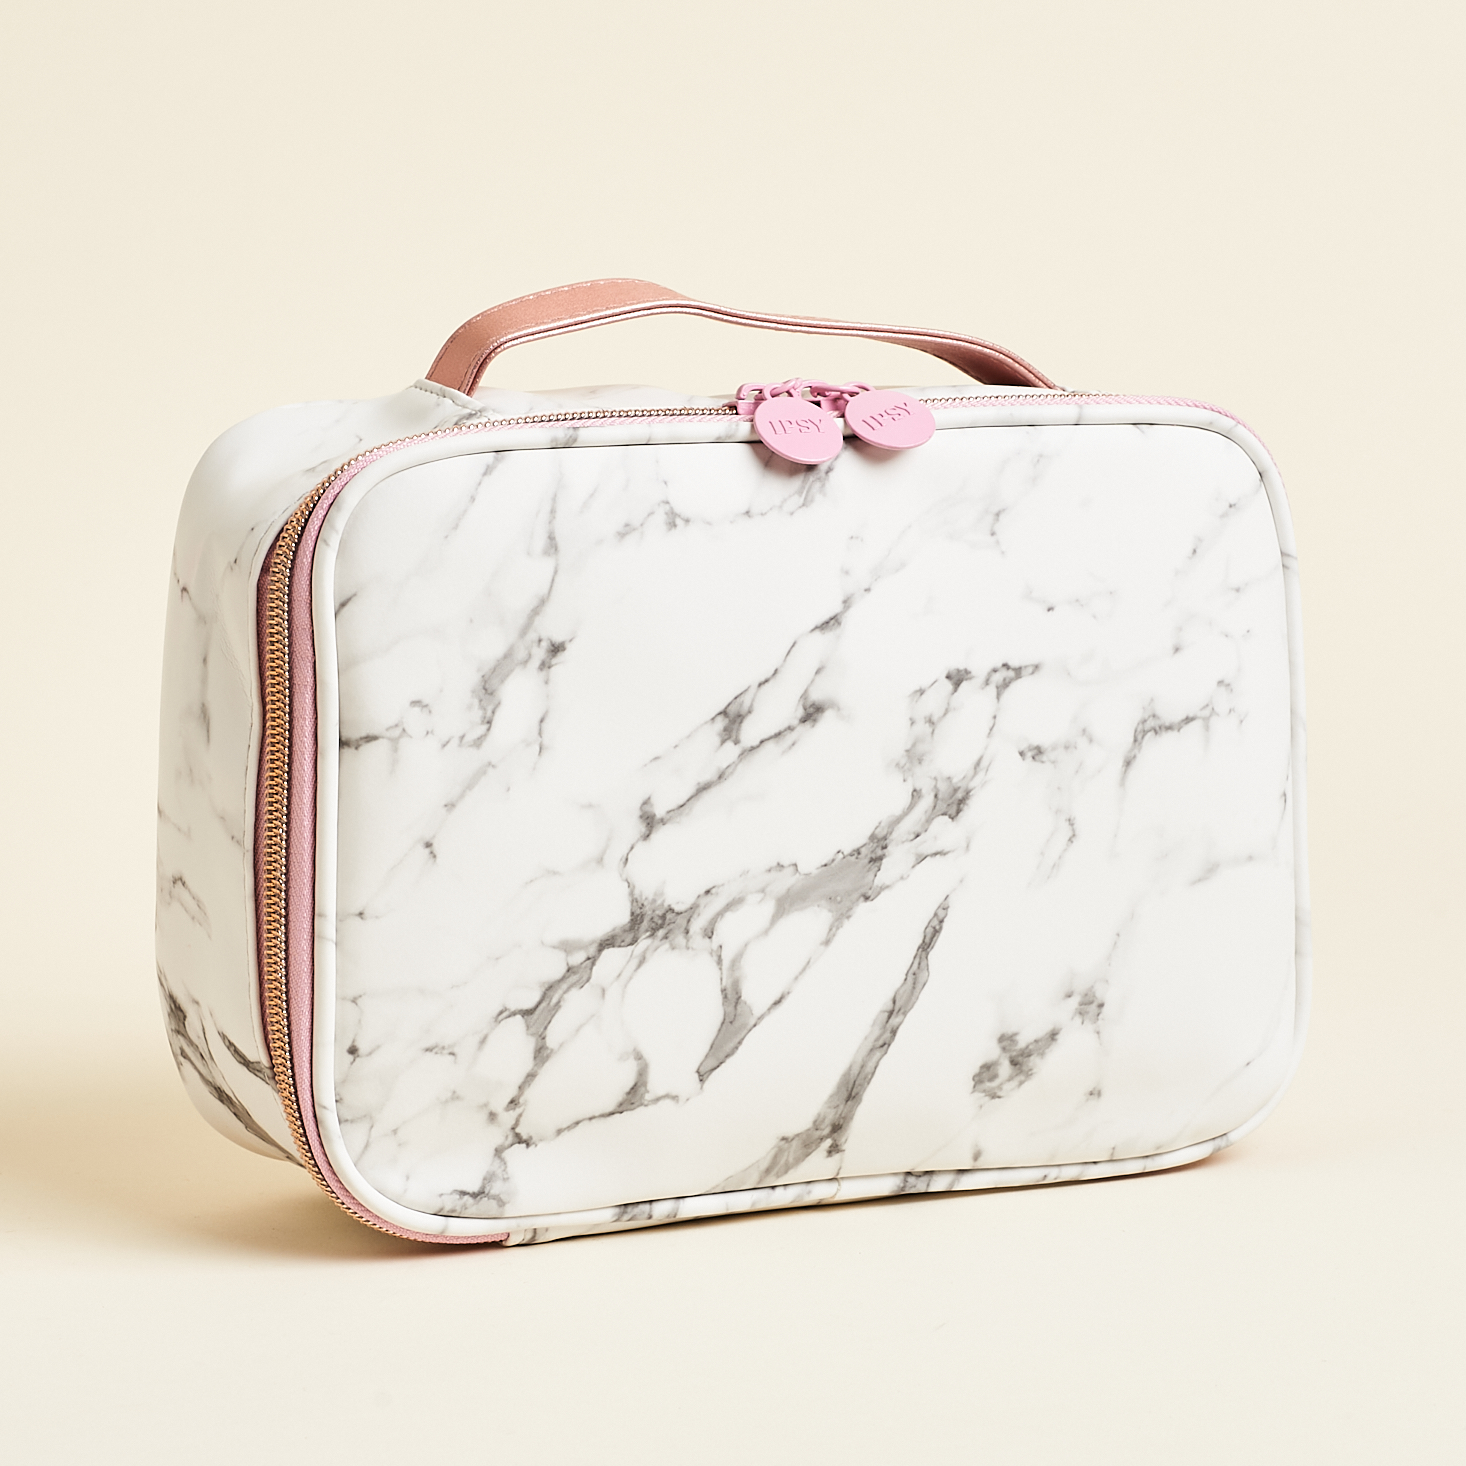 marble patterned train case with pink zipper